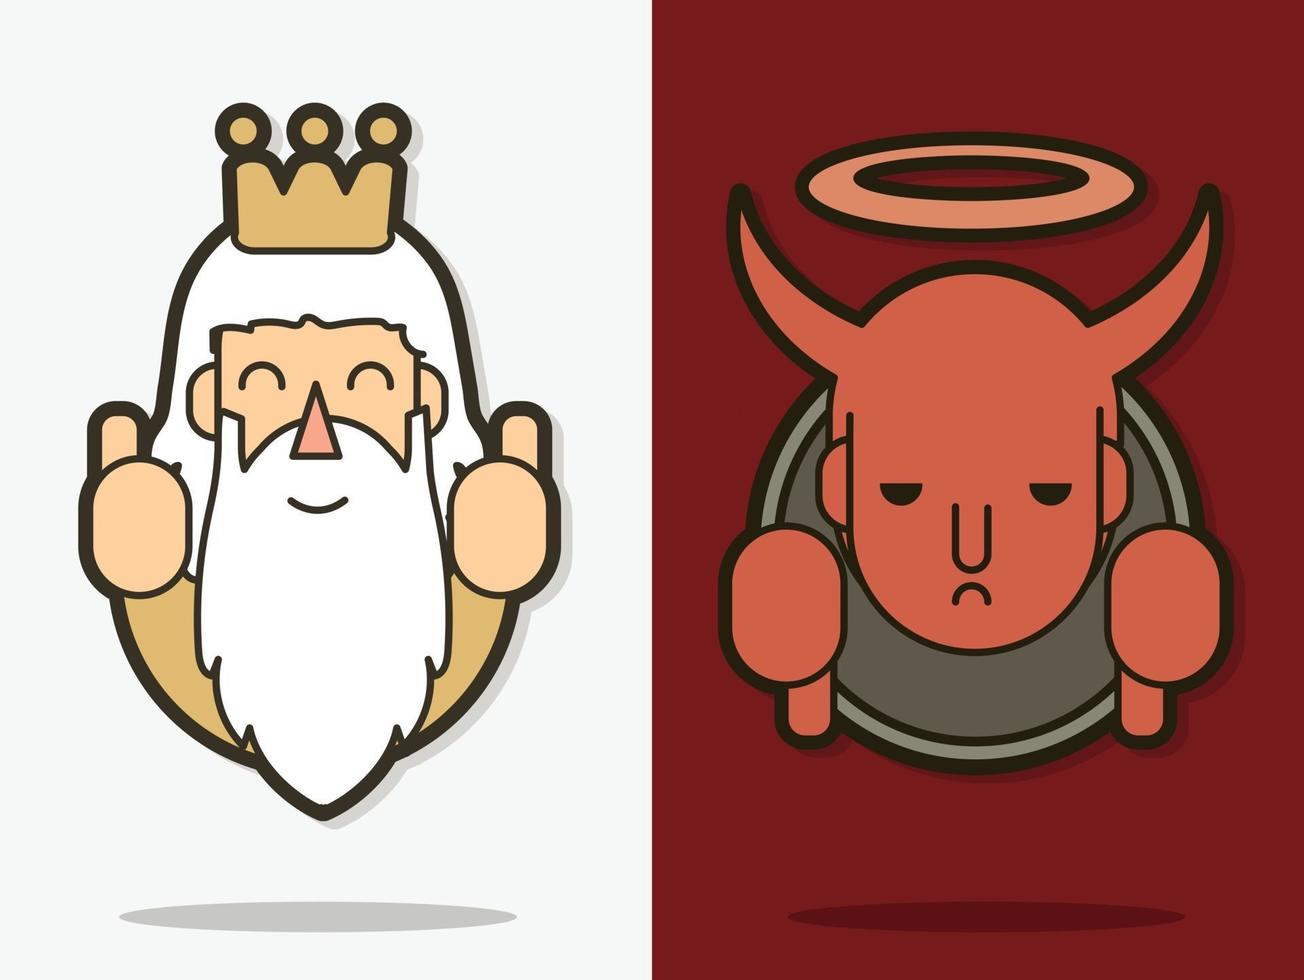 Good And Bad God And Devil Cartoon Graphic Vector